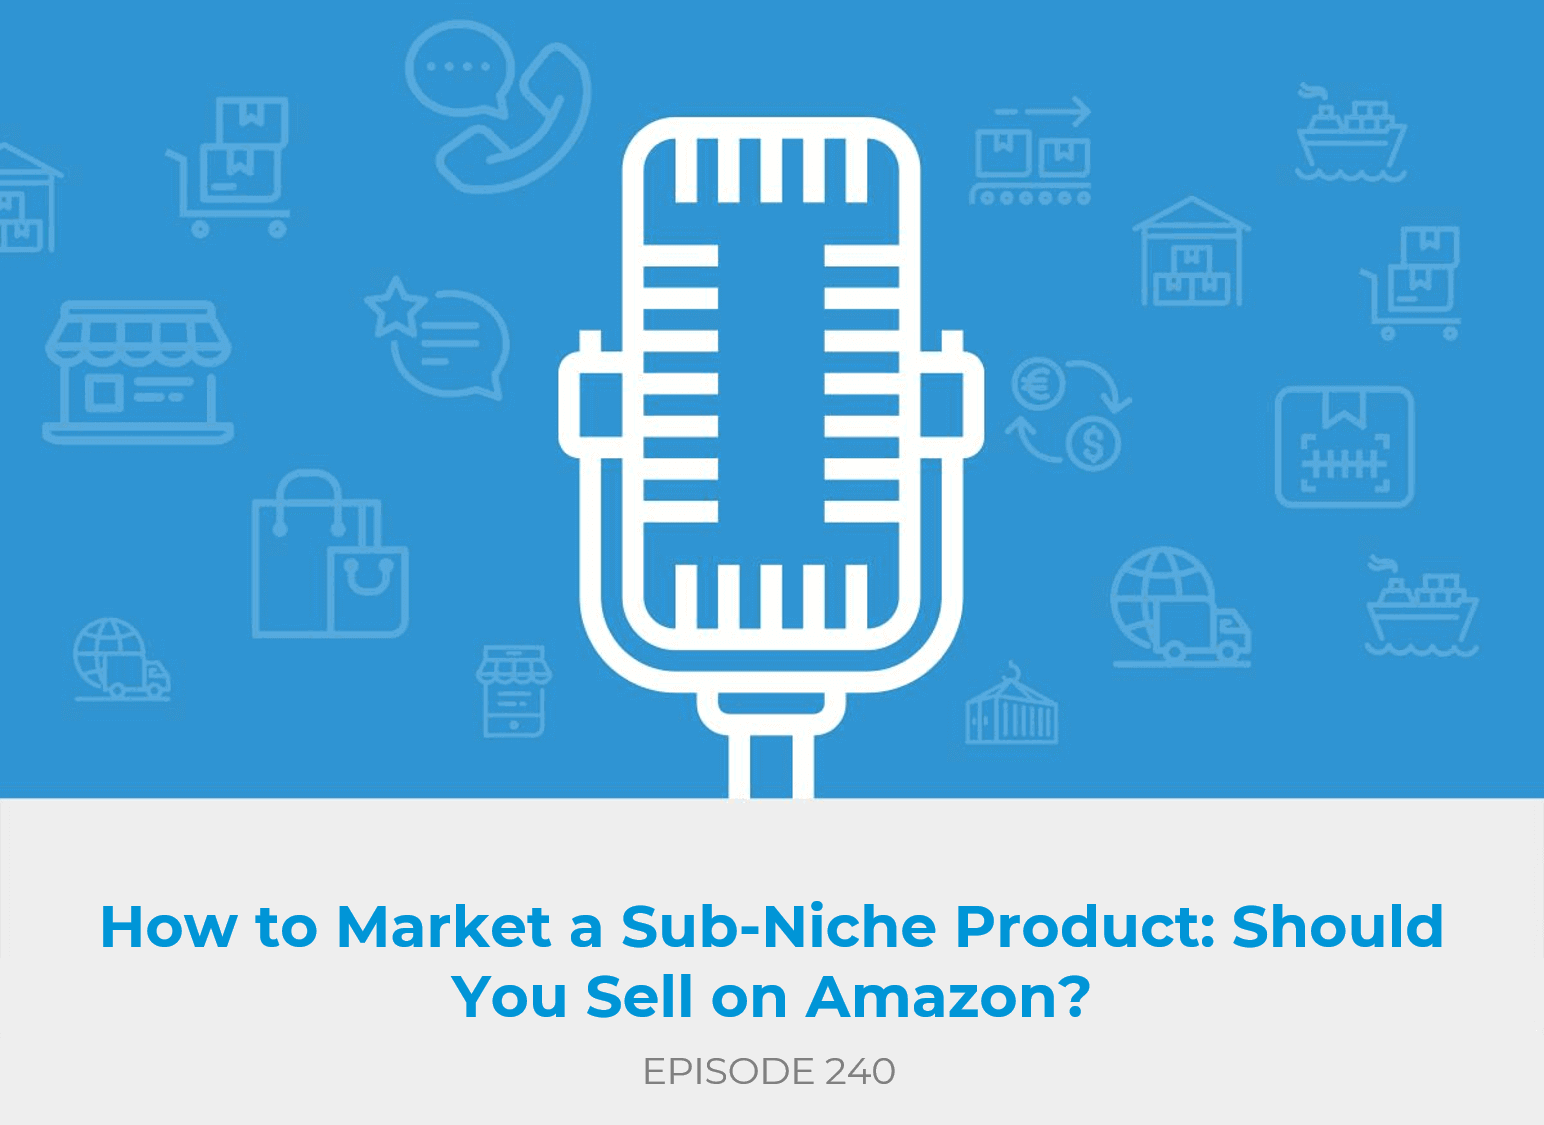 How to Market a Sub-Niche Product: Should You Sell on Amazon?